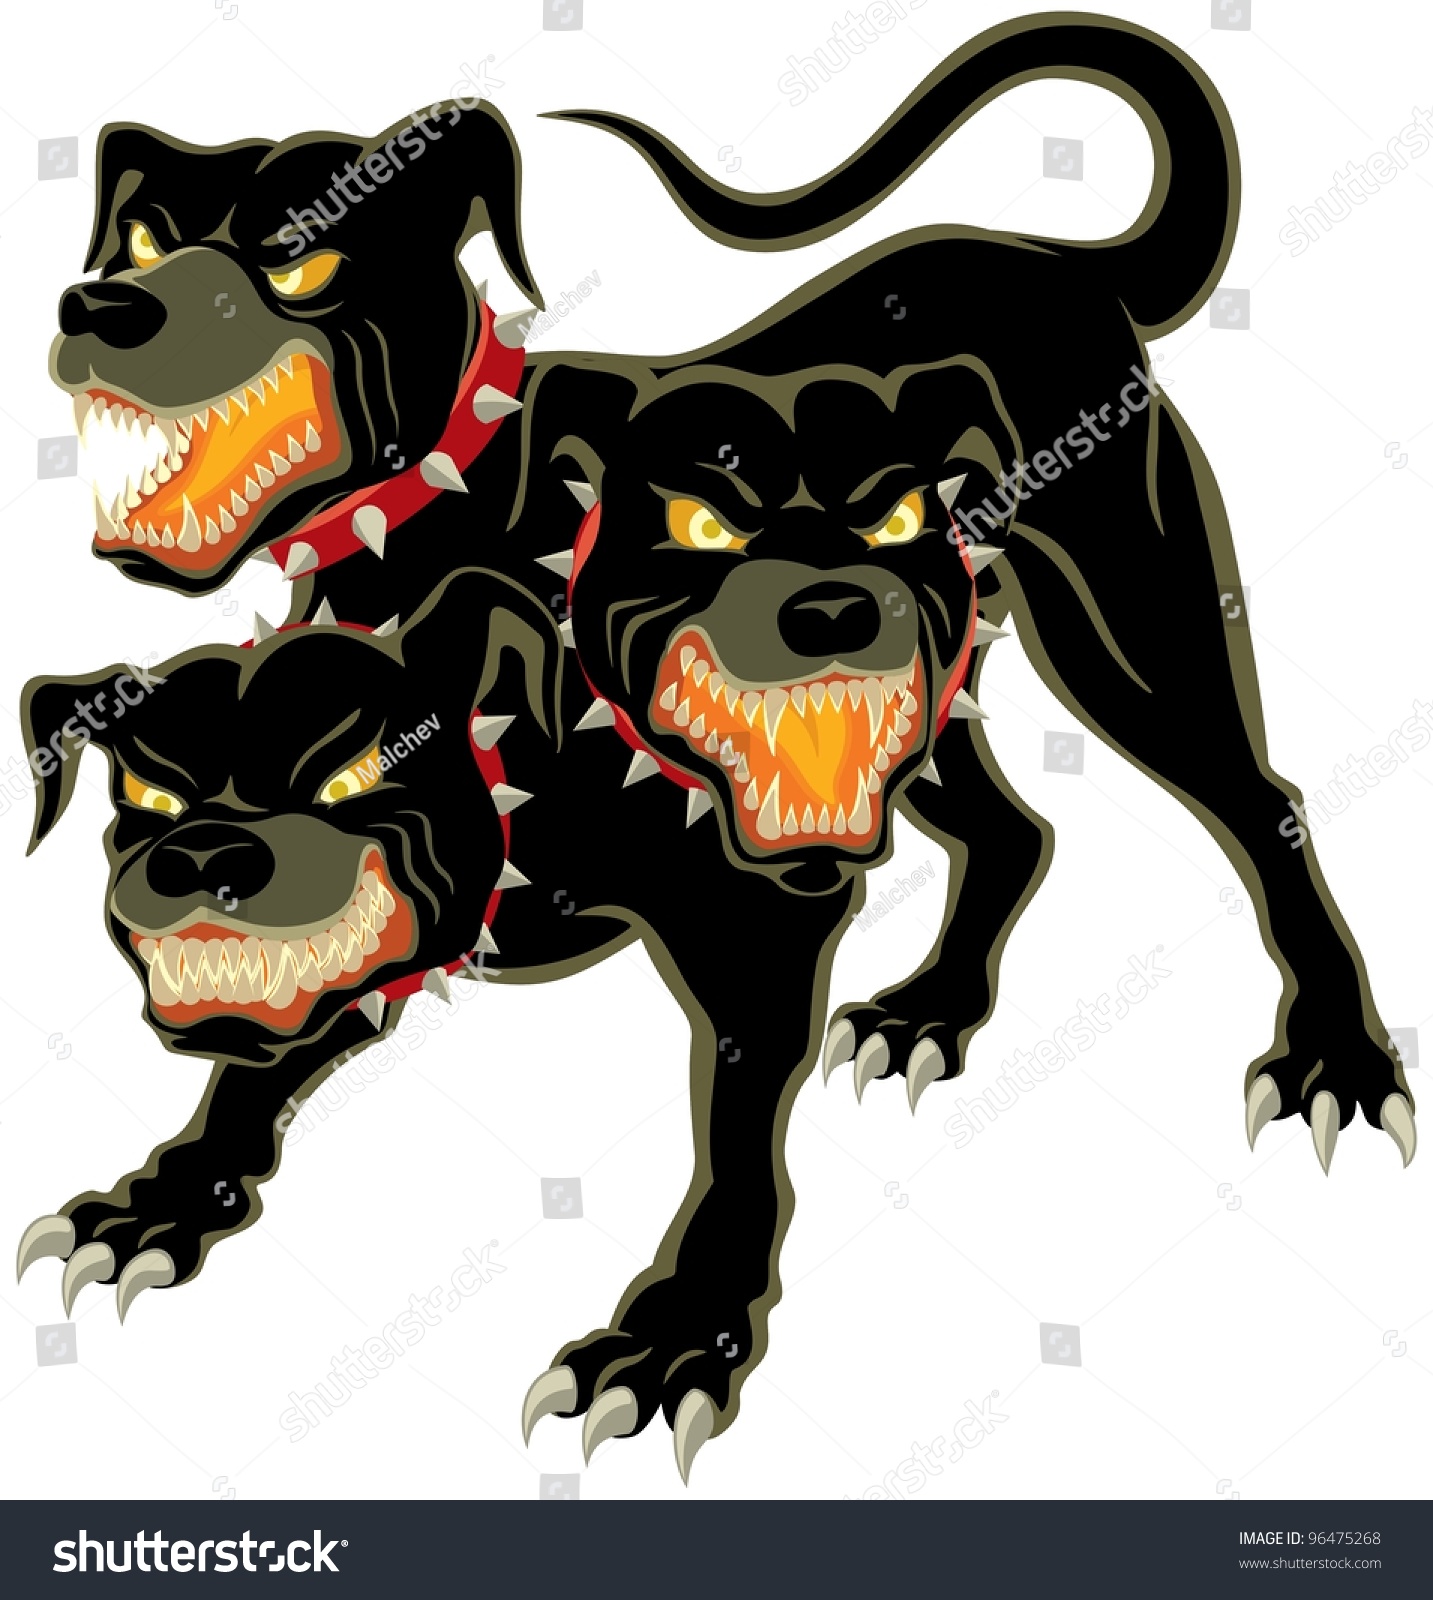 SVG of Cerberus on White: The three headed dog - Cerberus.  No transparency and gradients used. svg